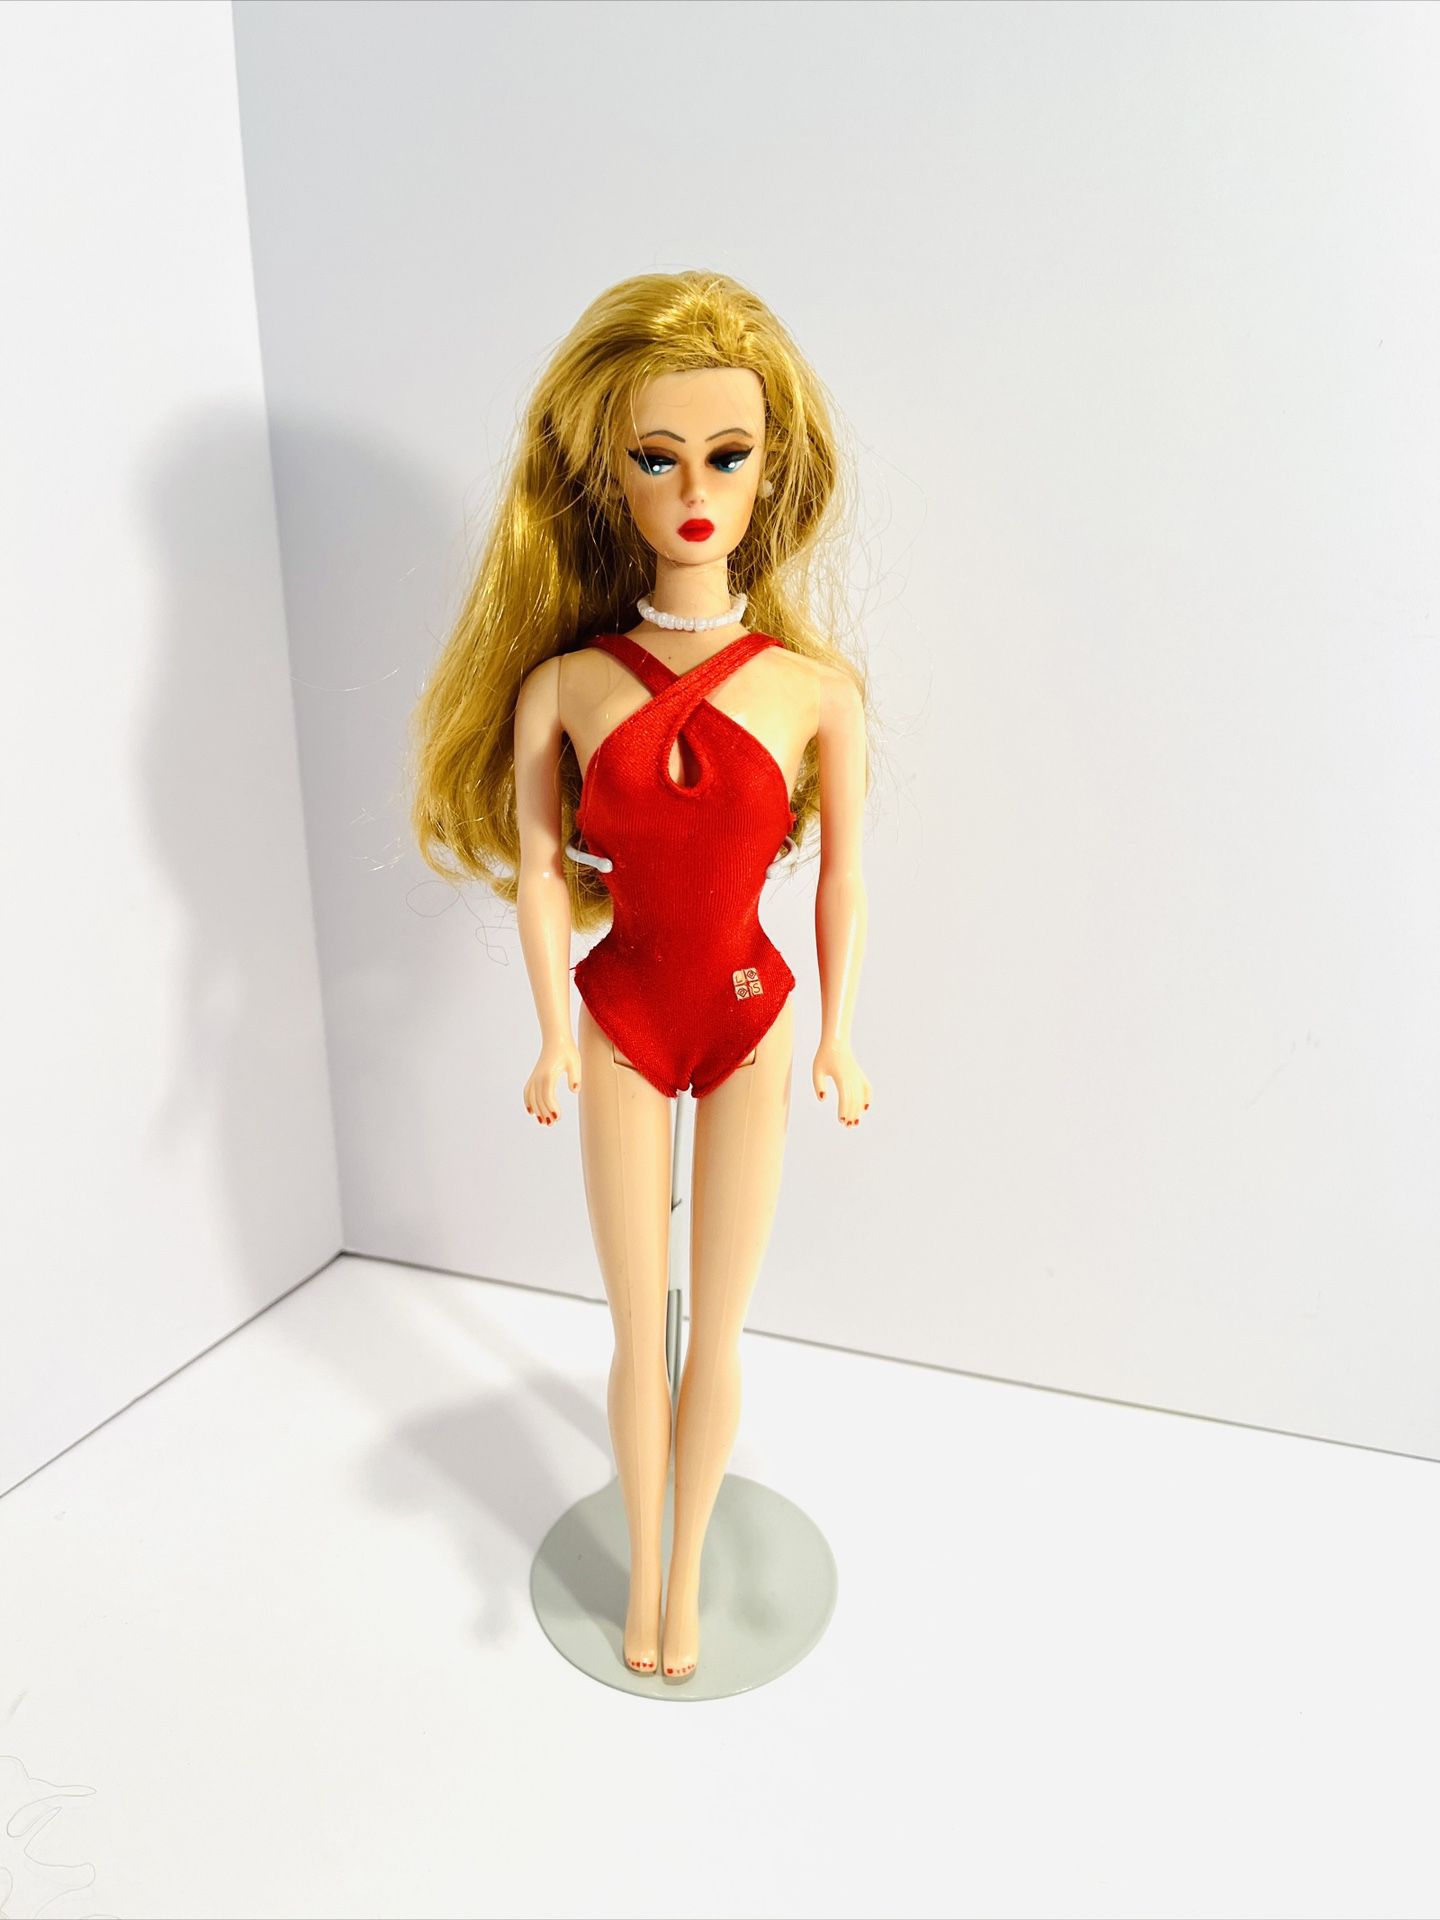 Barbie Doll Reproduction 1(contact info removed) Mattel Inc. Malaysia Red Swimsuit